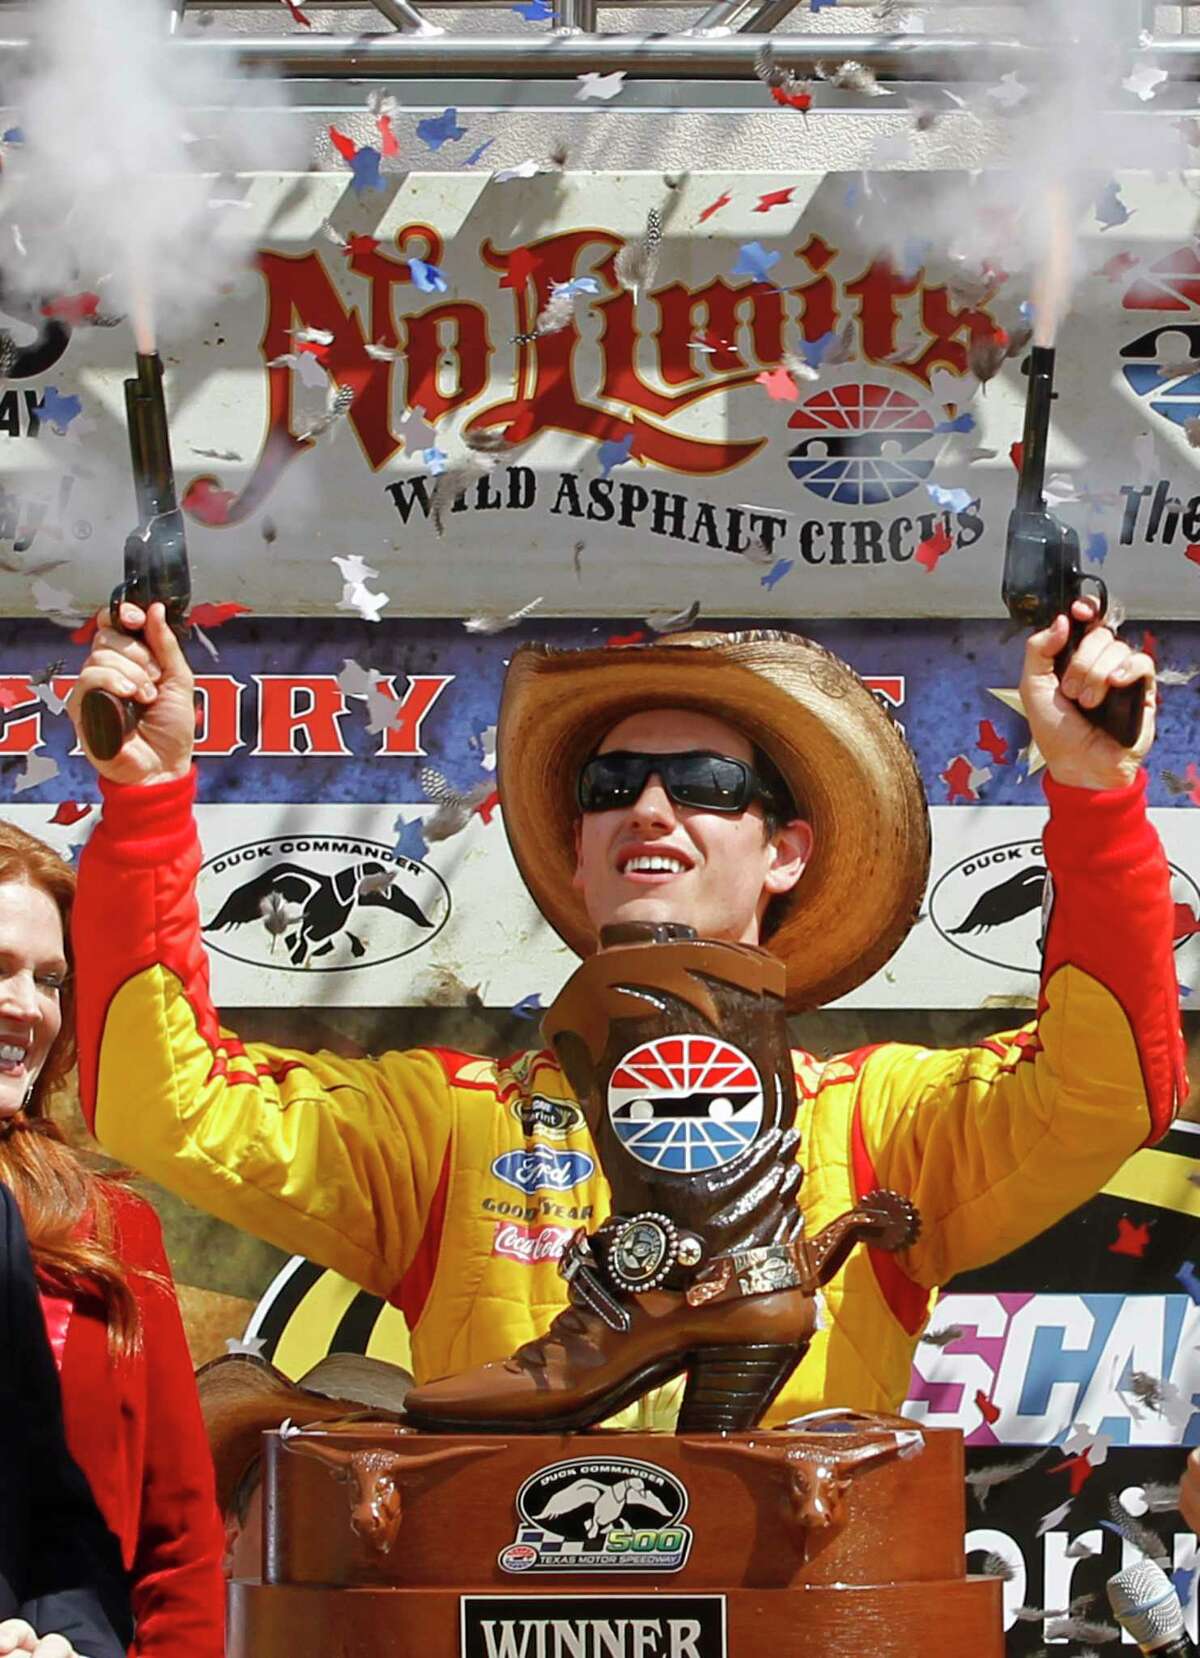 In this April 7, 2014 file photo, Joey Logano shoots off pistols celebrating winning the NASCAR Sprint Cup race at Texas Motor Speedway in Fort Worth.